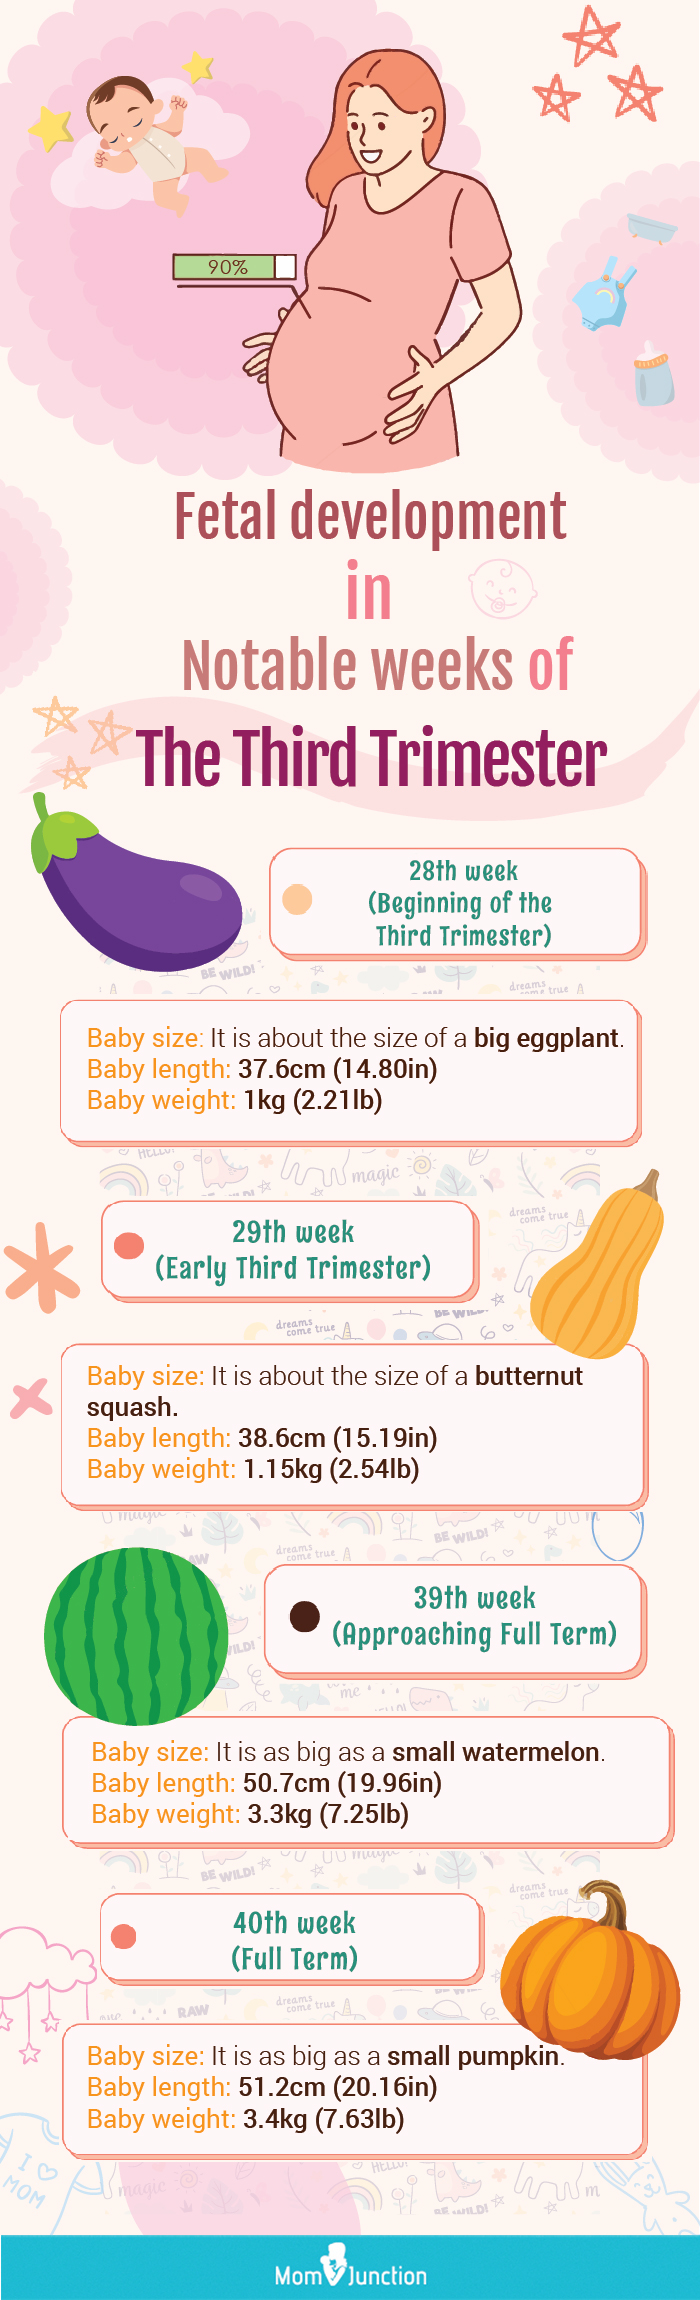 fetal development in notable weeks of the third trimester (infographic)